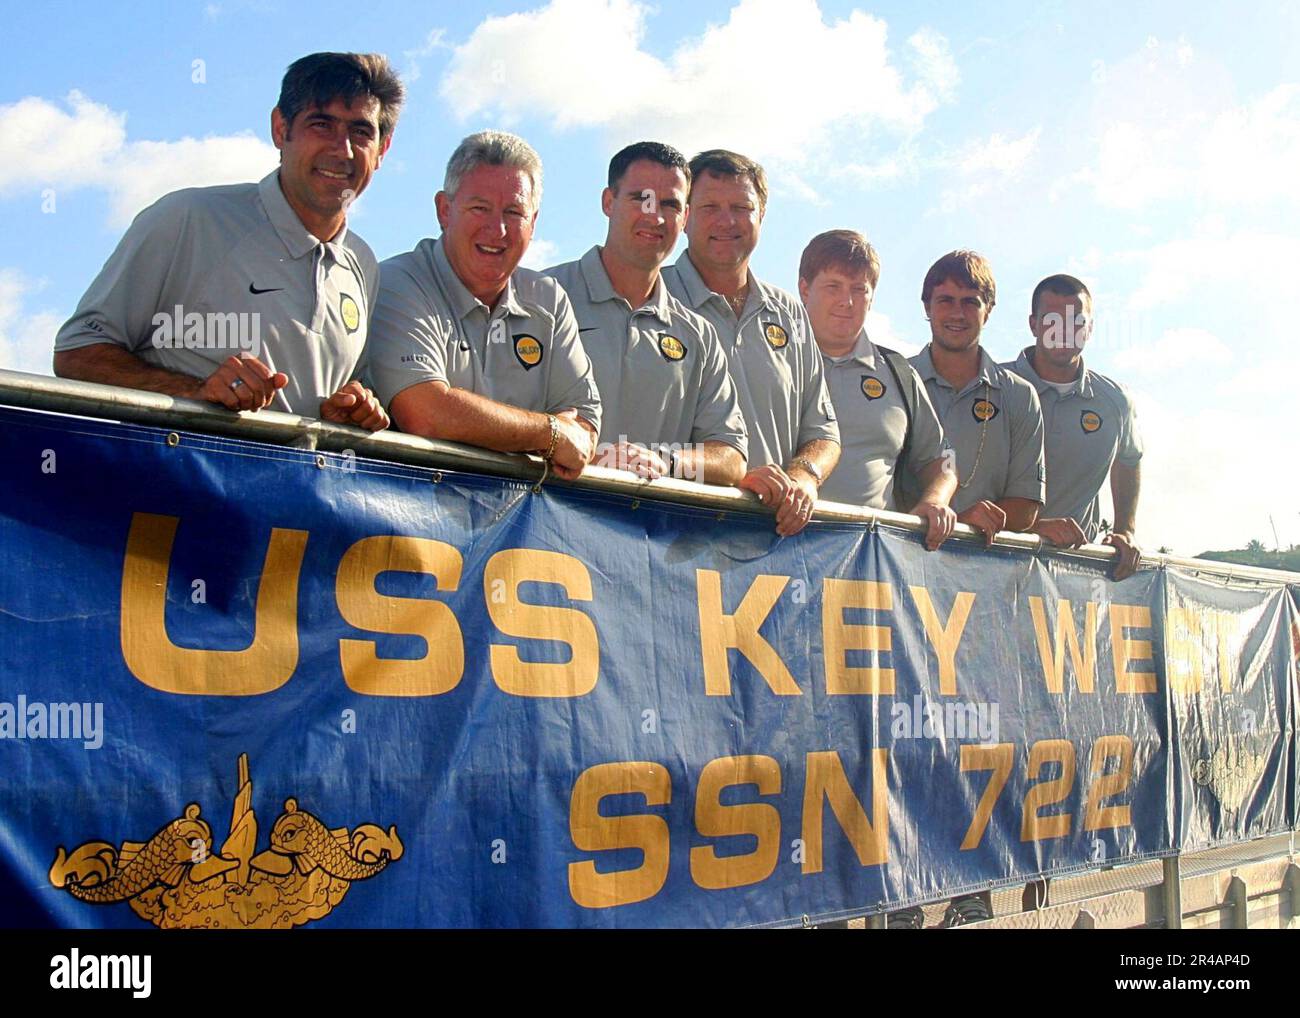 US Navy Players and coaches from the Major League Soccer team, the Los Angeles Galaxy pose for a photograph on the brow of the Los Angeles-class attack submarine USS Key West Stock Photo